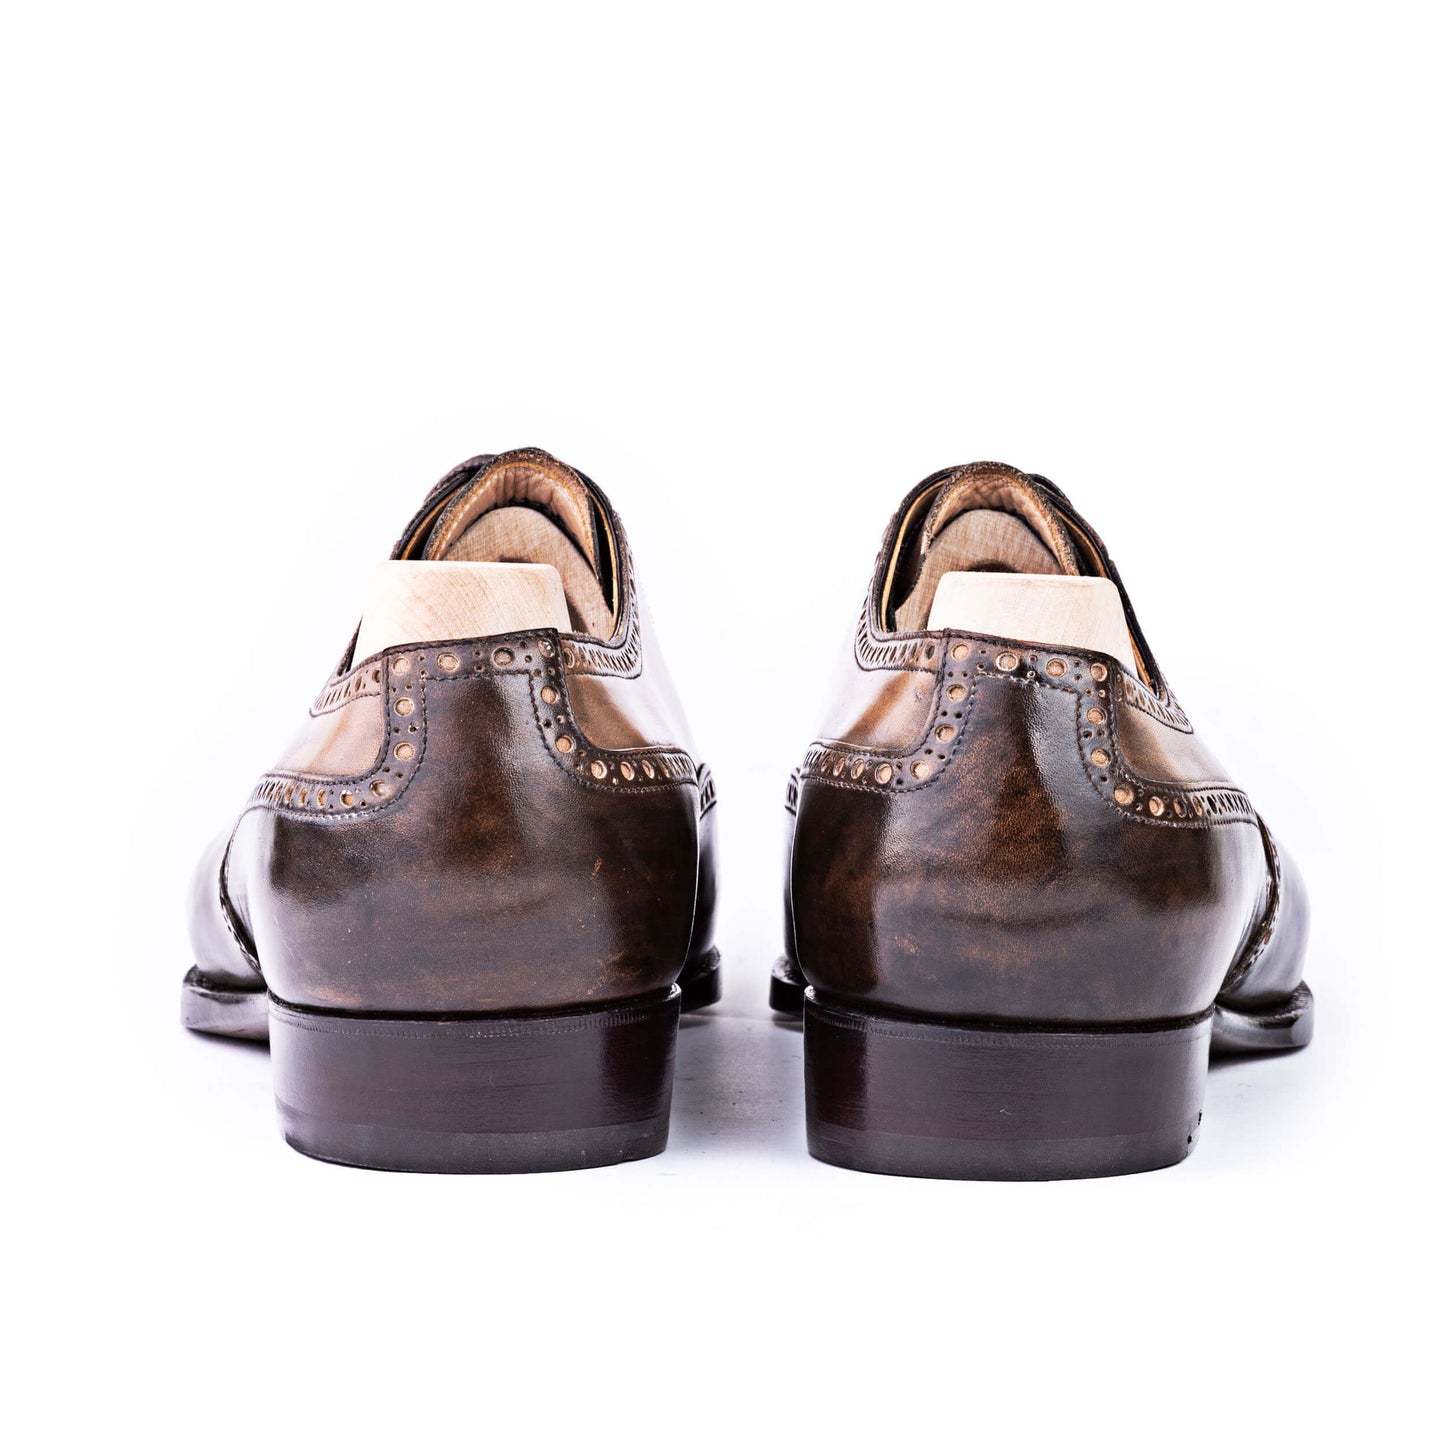 Long wing full brogue Oxford - Biccolore, Spectator!